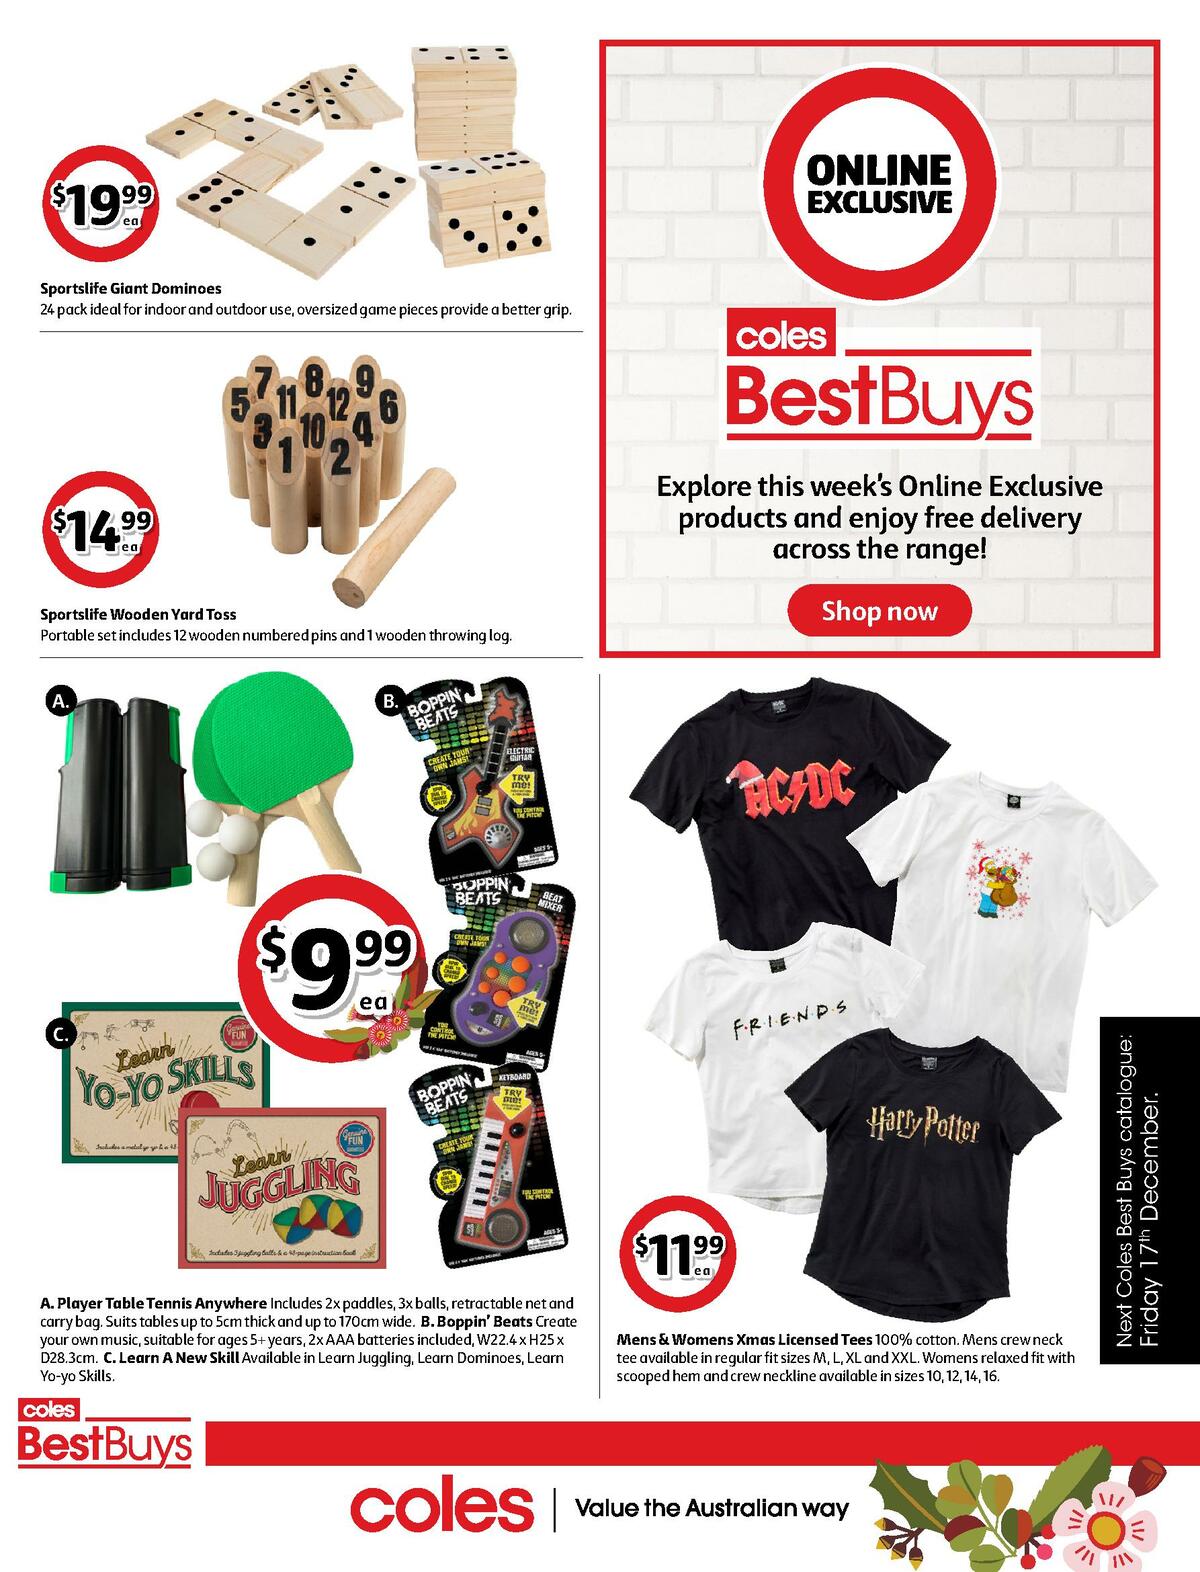 Coles Best Buys - Stocking Stuffers Catalogues from 10 December